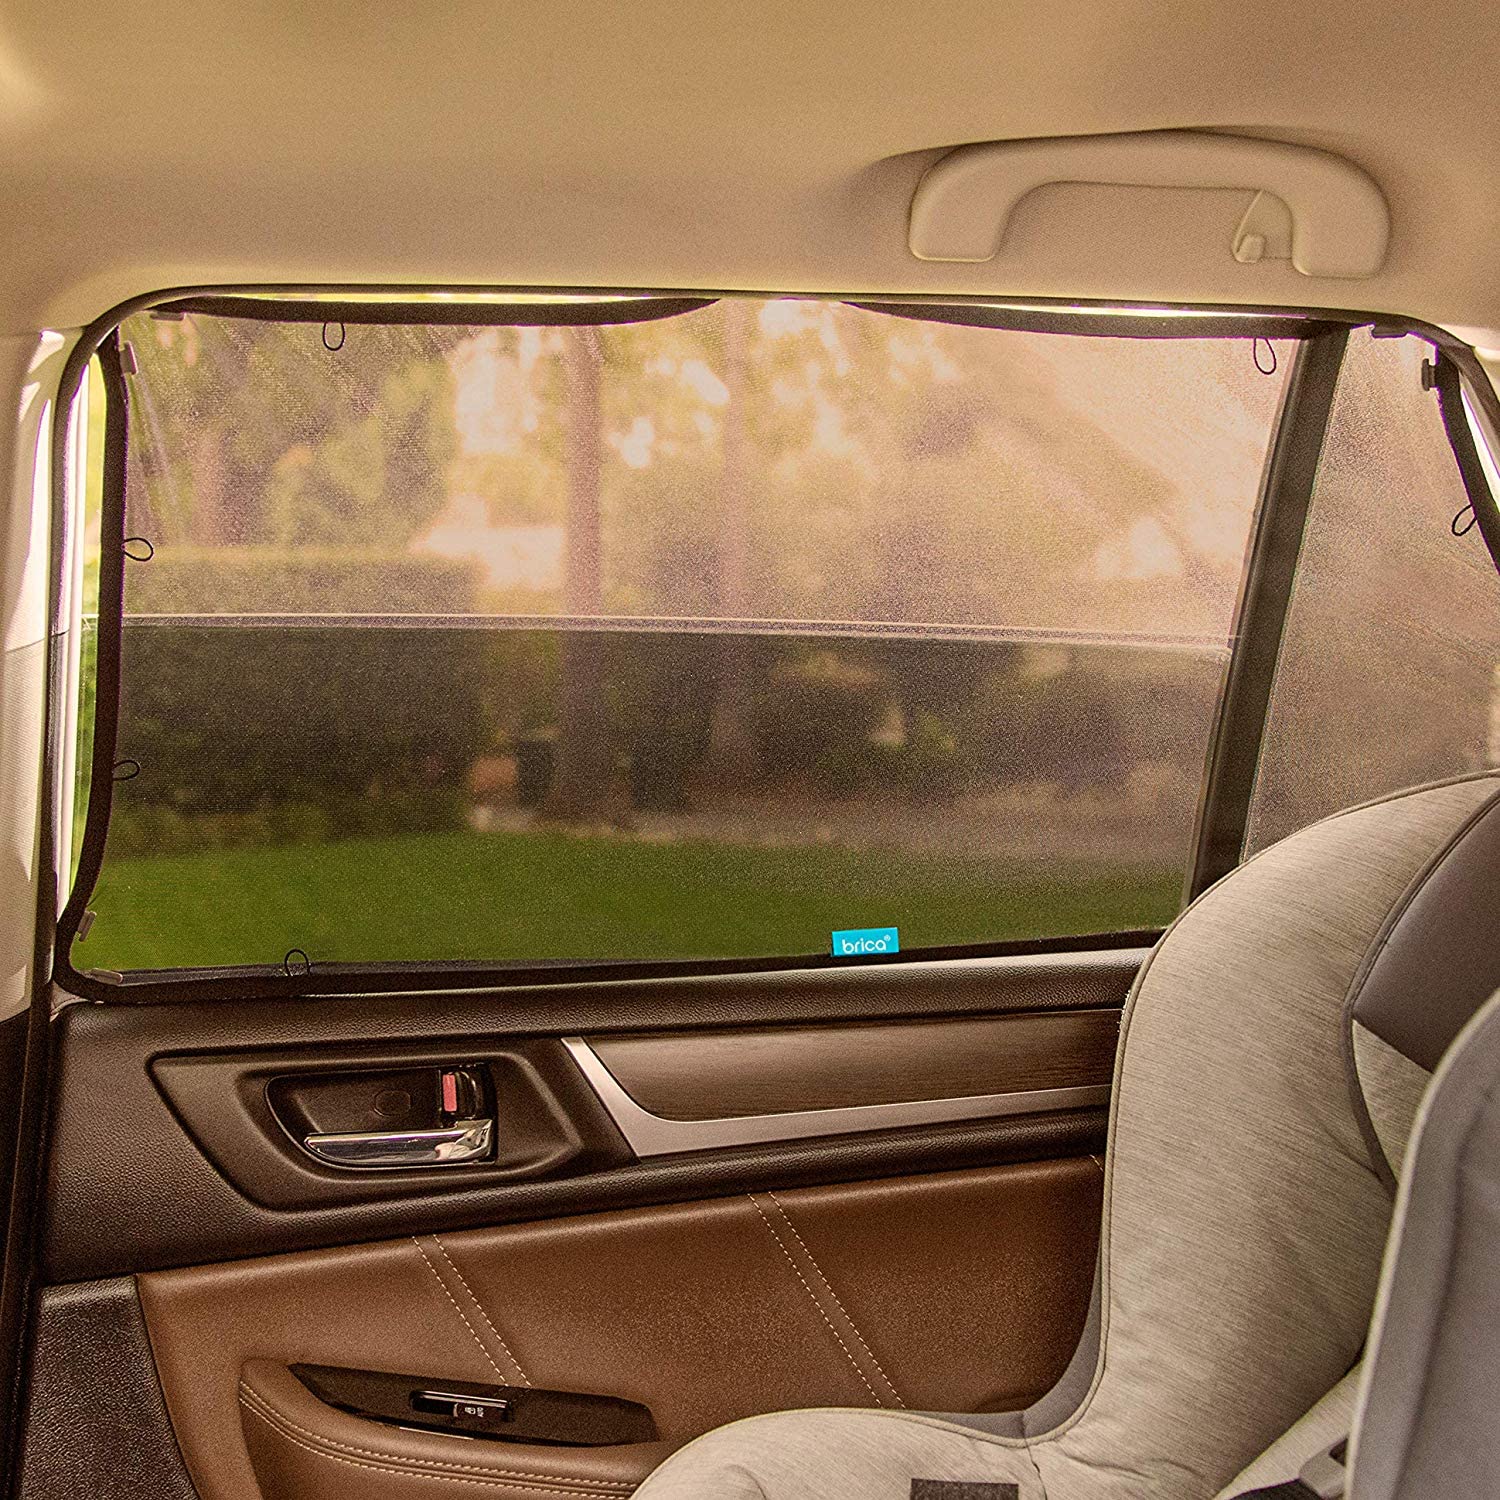 Munchkin Magnetic Stretch to Fit Sunshade, Black.